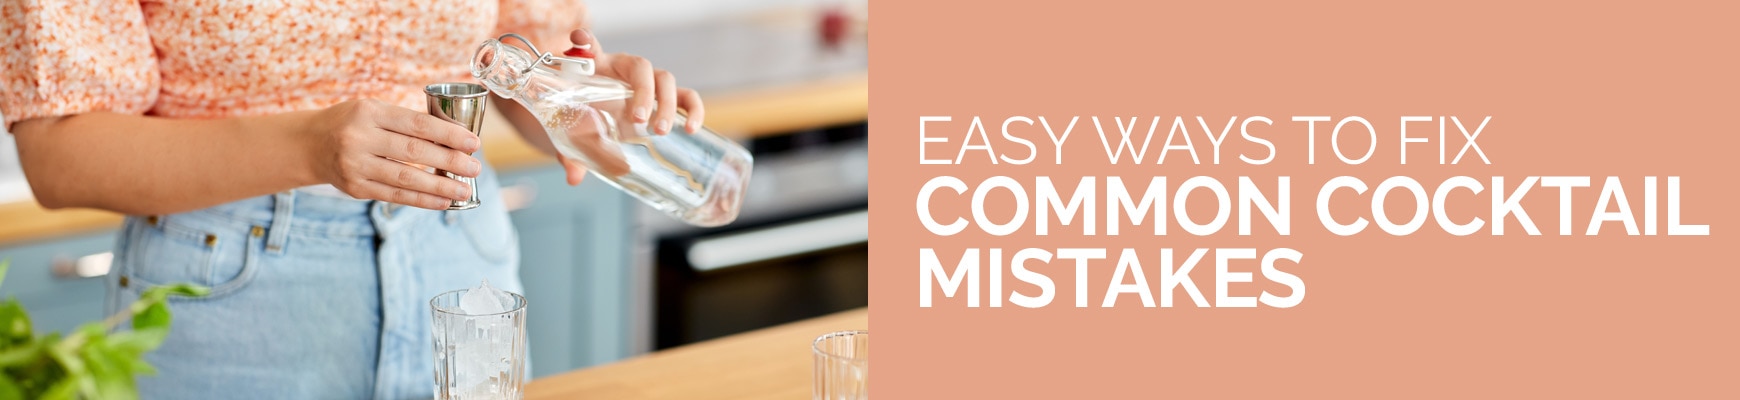 Easy Ways to Fix Common Cocktail Mistakes